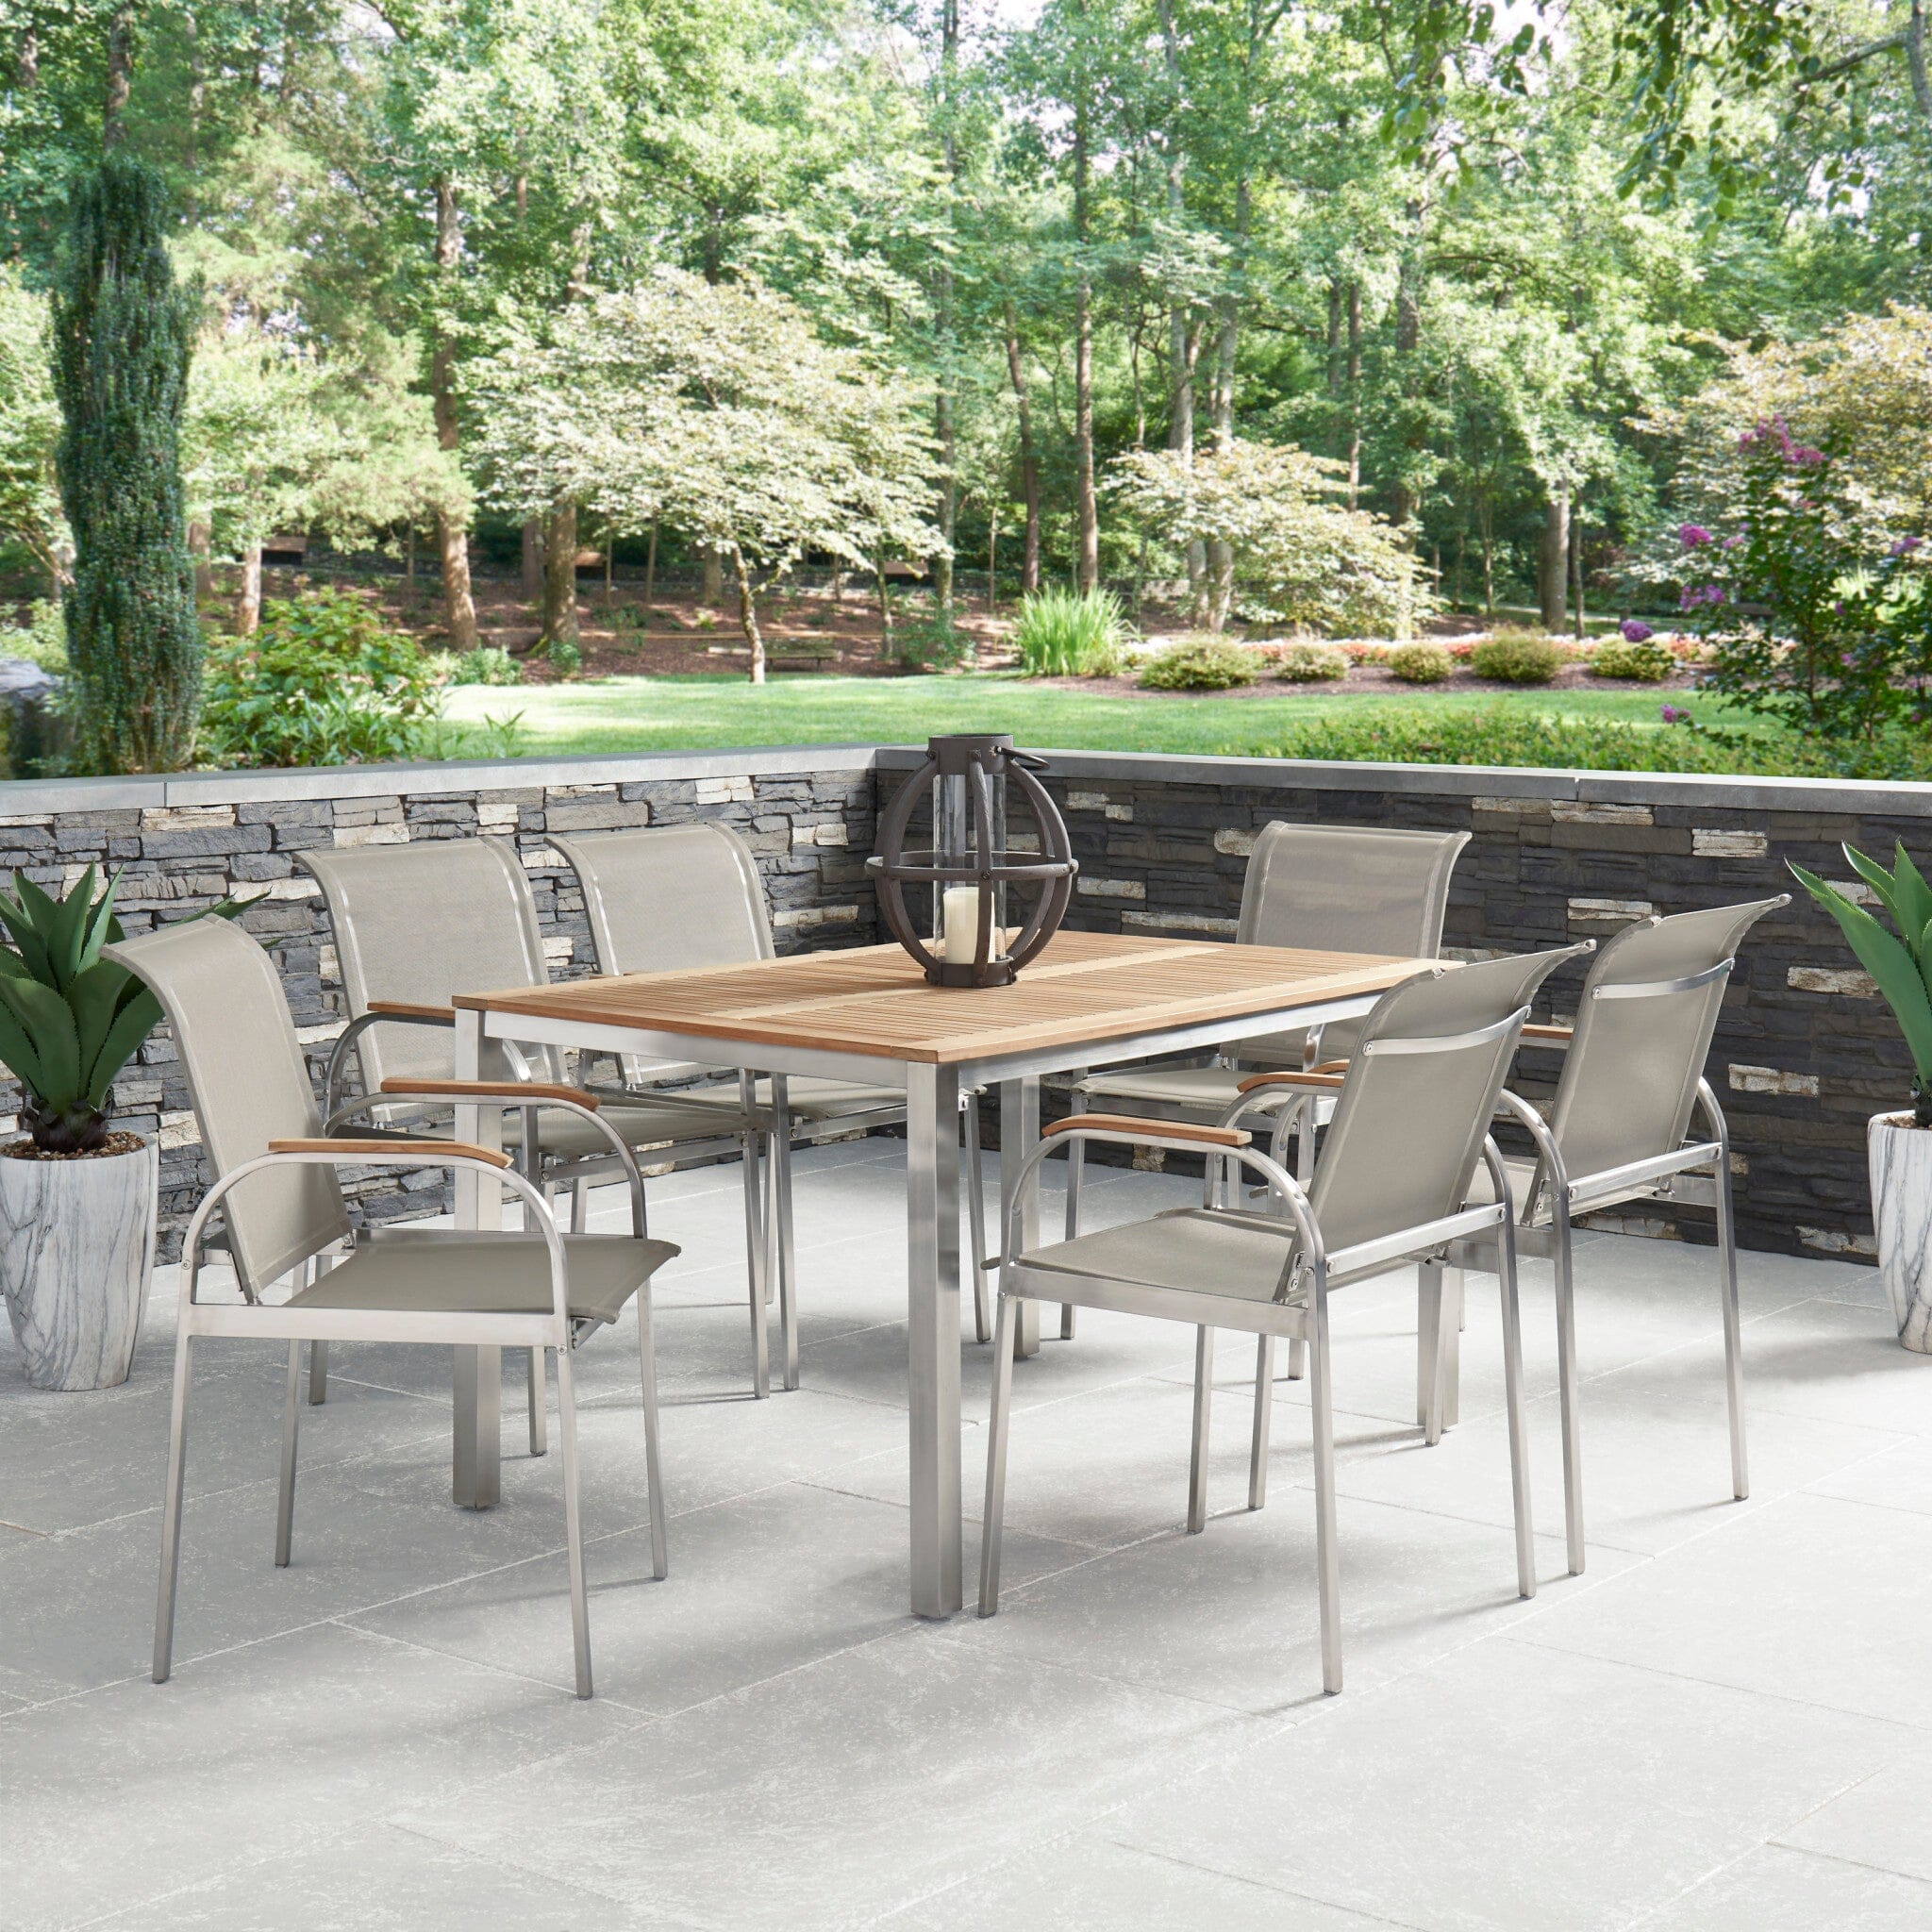 Traditional Outdoor Dining Table By Aruba Outdoor Dining Aruba